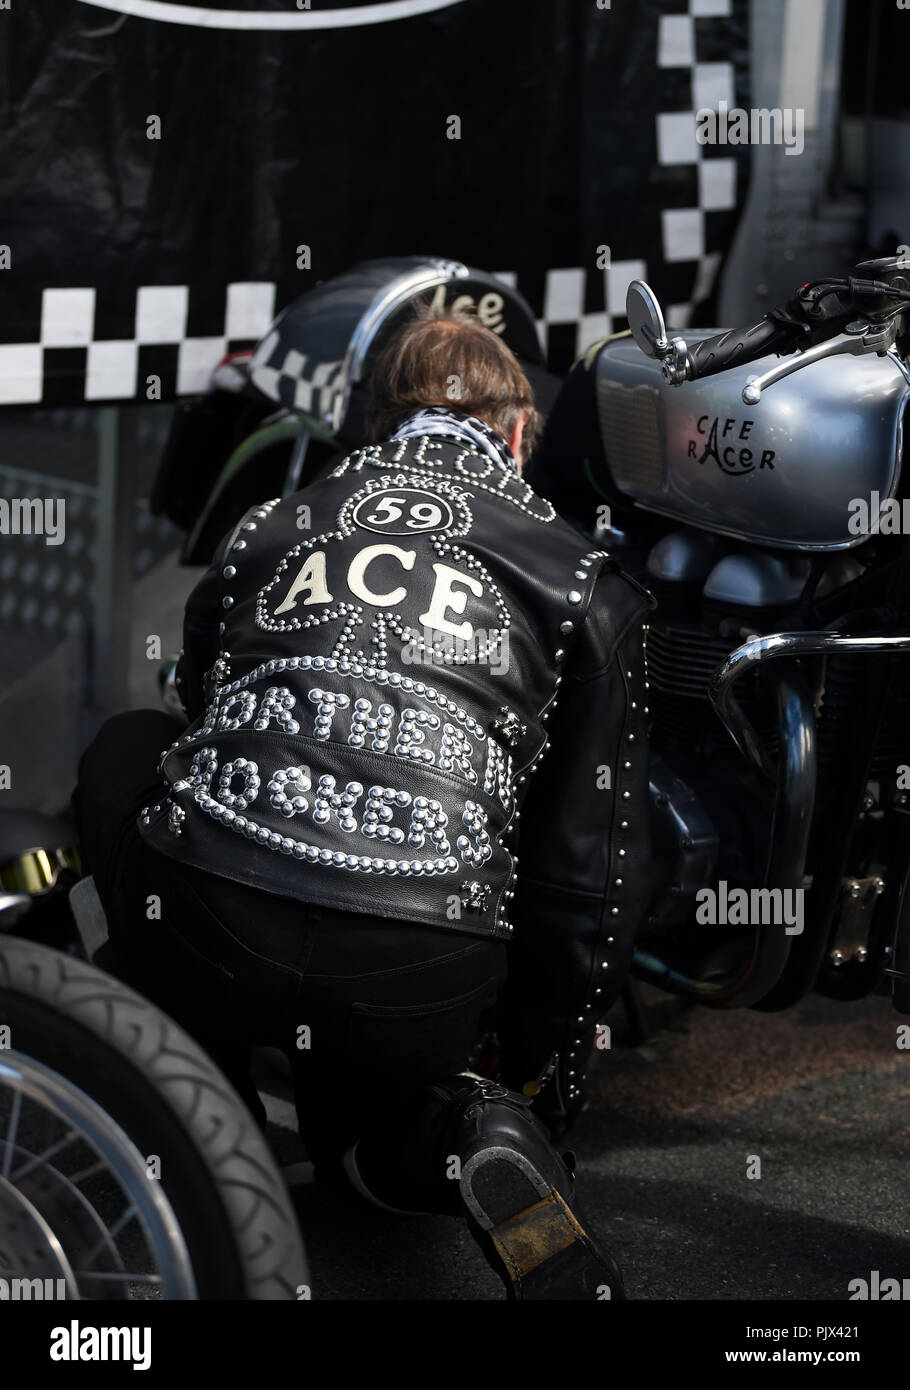 Brighton, UK. 9th September 2018. Thousands of bikers and rockers enjoy ...